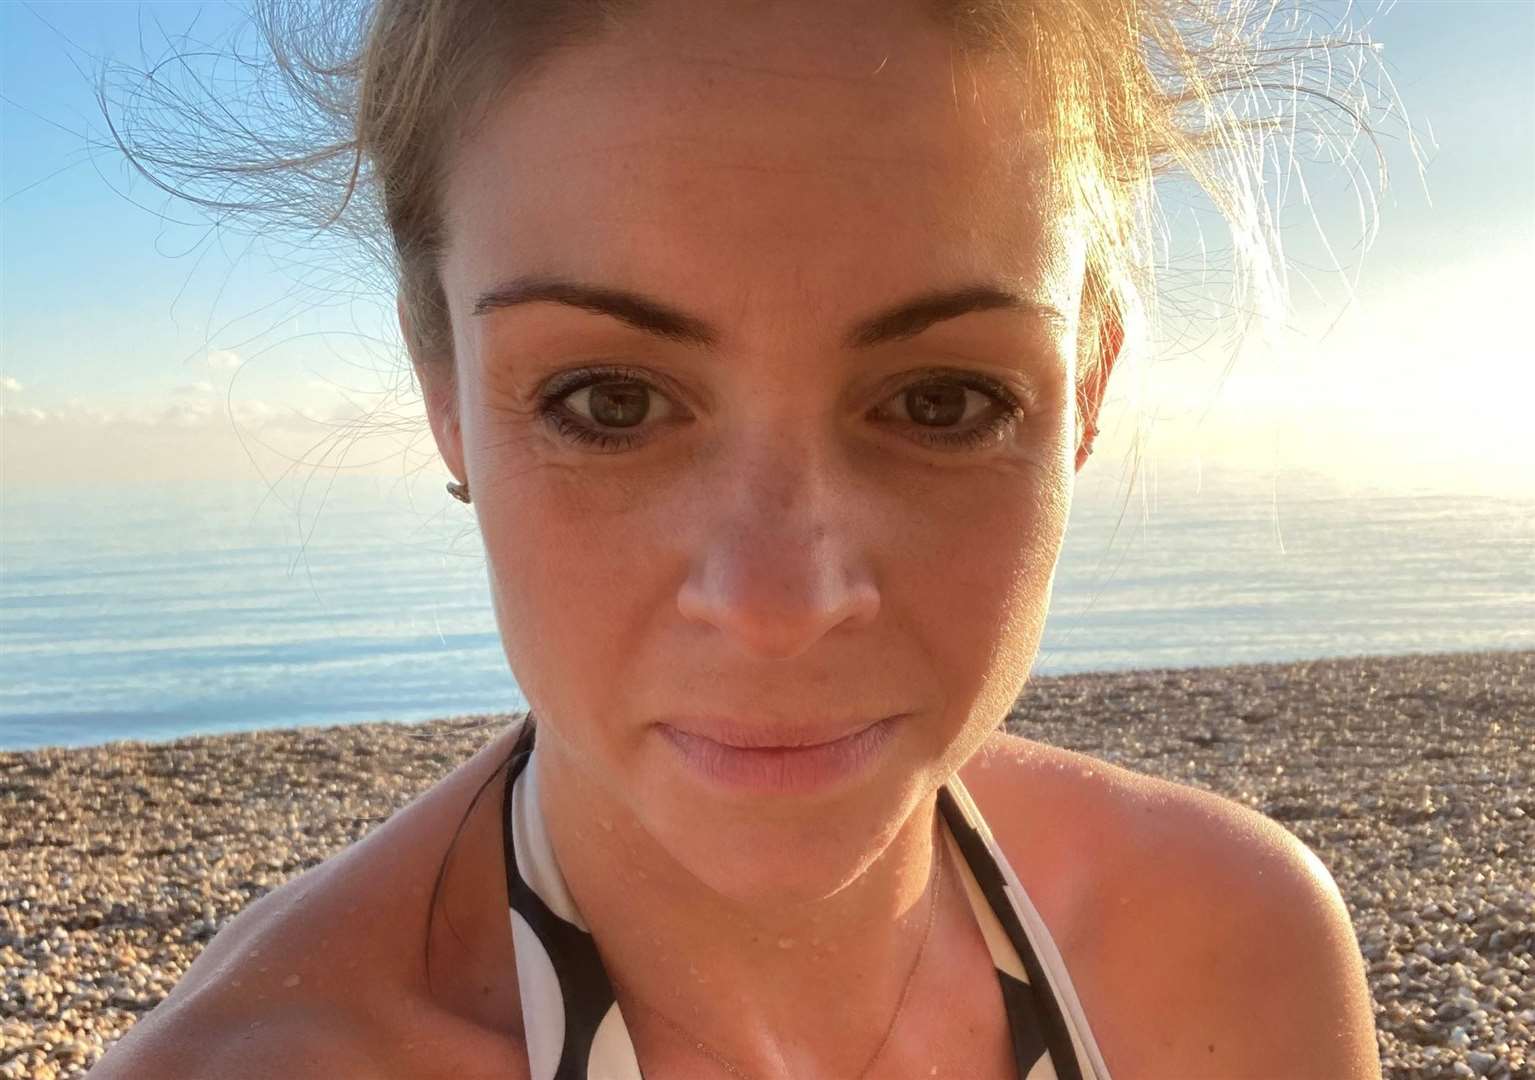 Jo Lamb swam in the sea everyday for two months